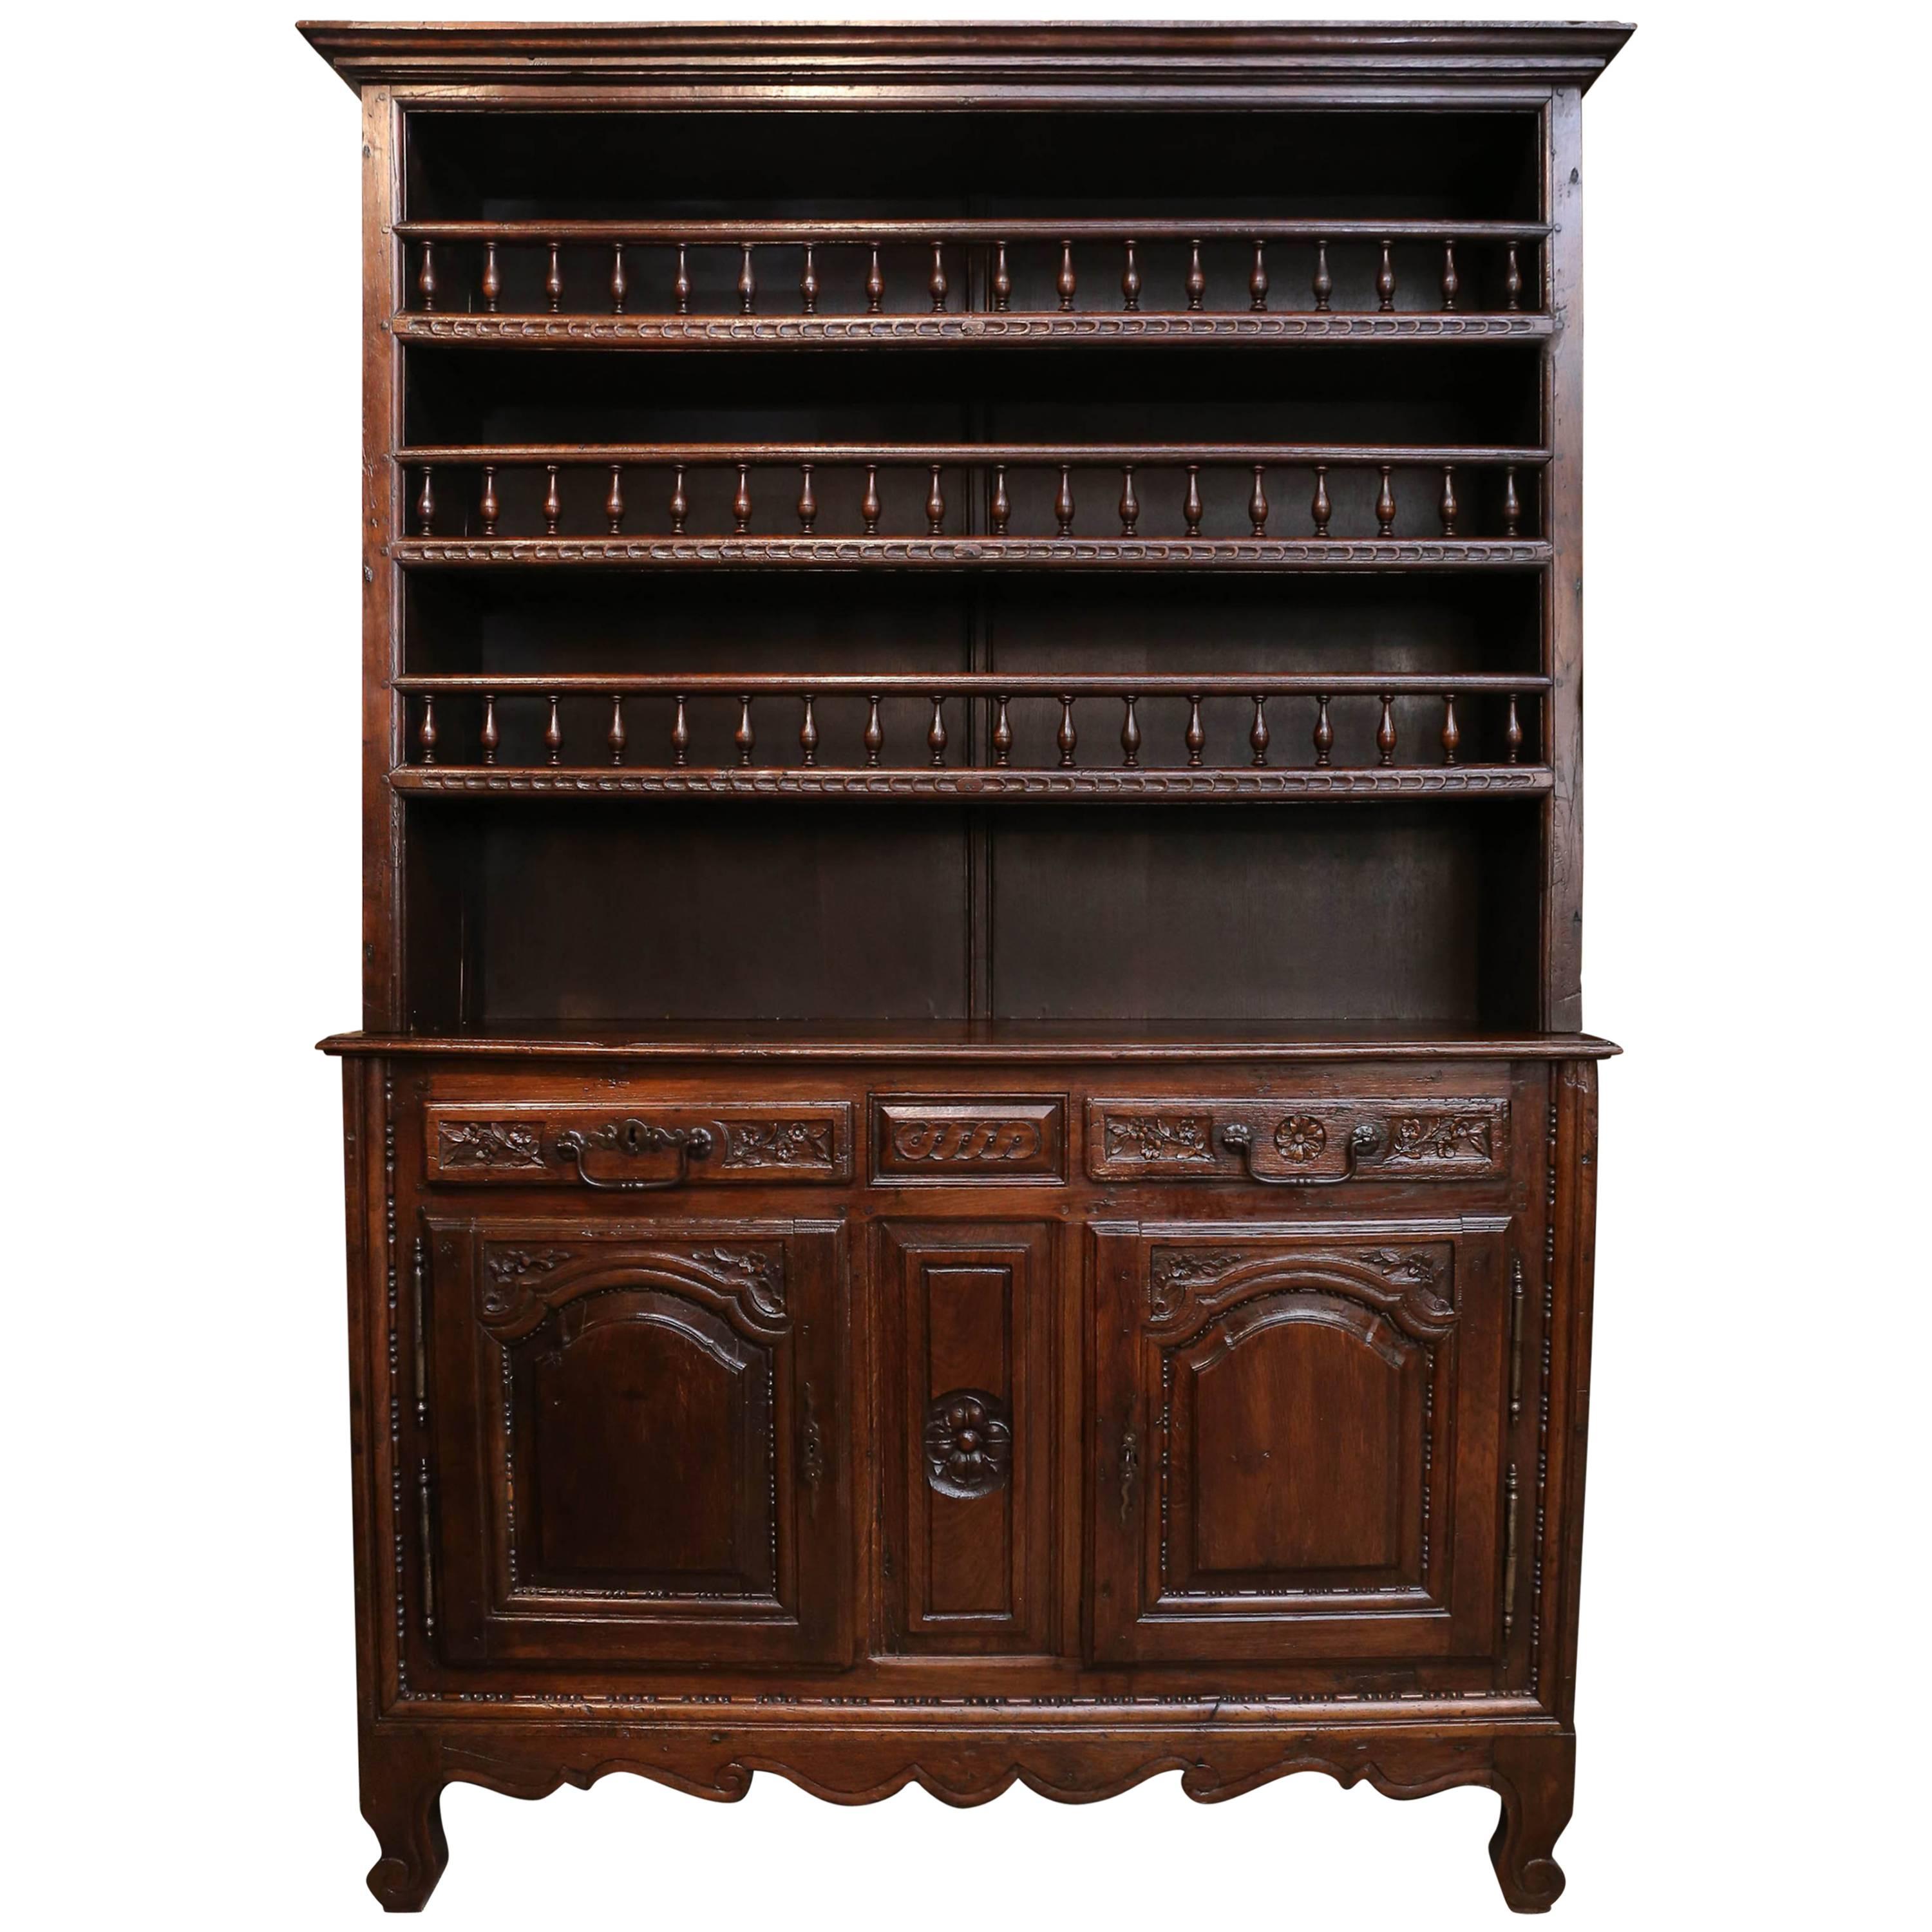 French Vassilier/Cupboard in Oak with Iron Drawer Pulls, Louis XV Style, 18 th c